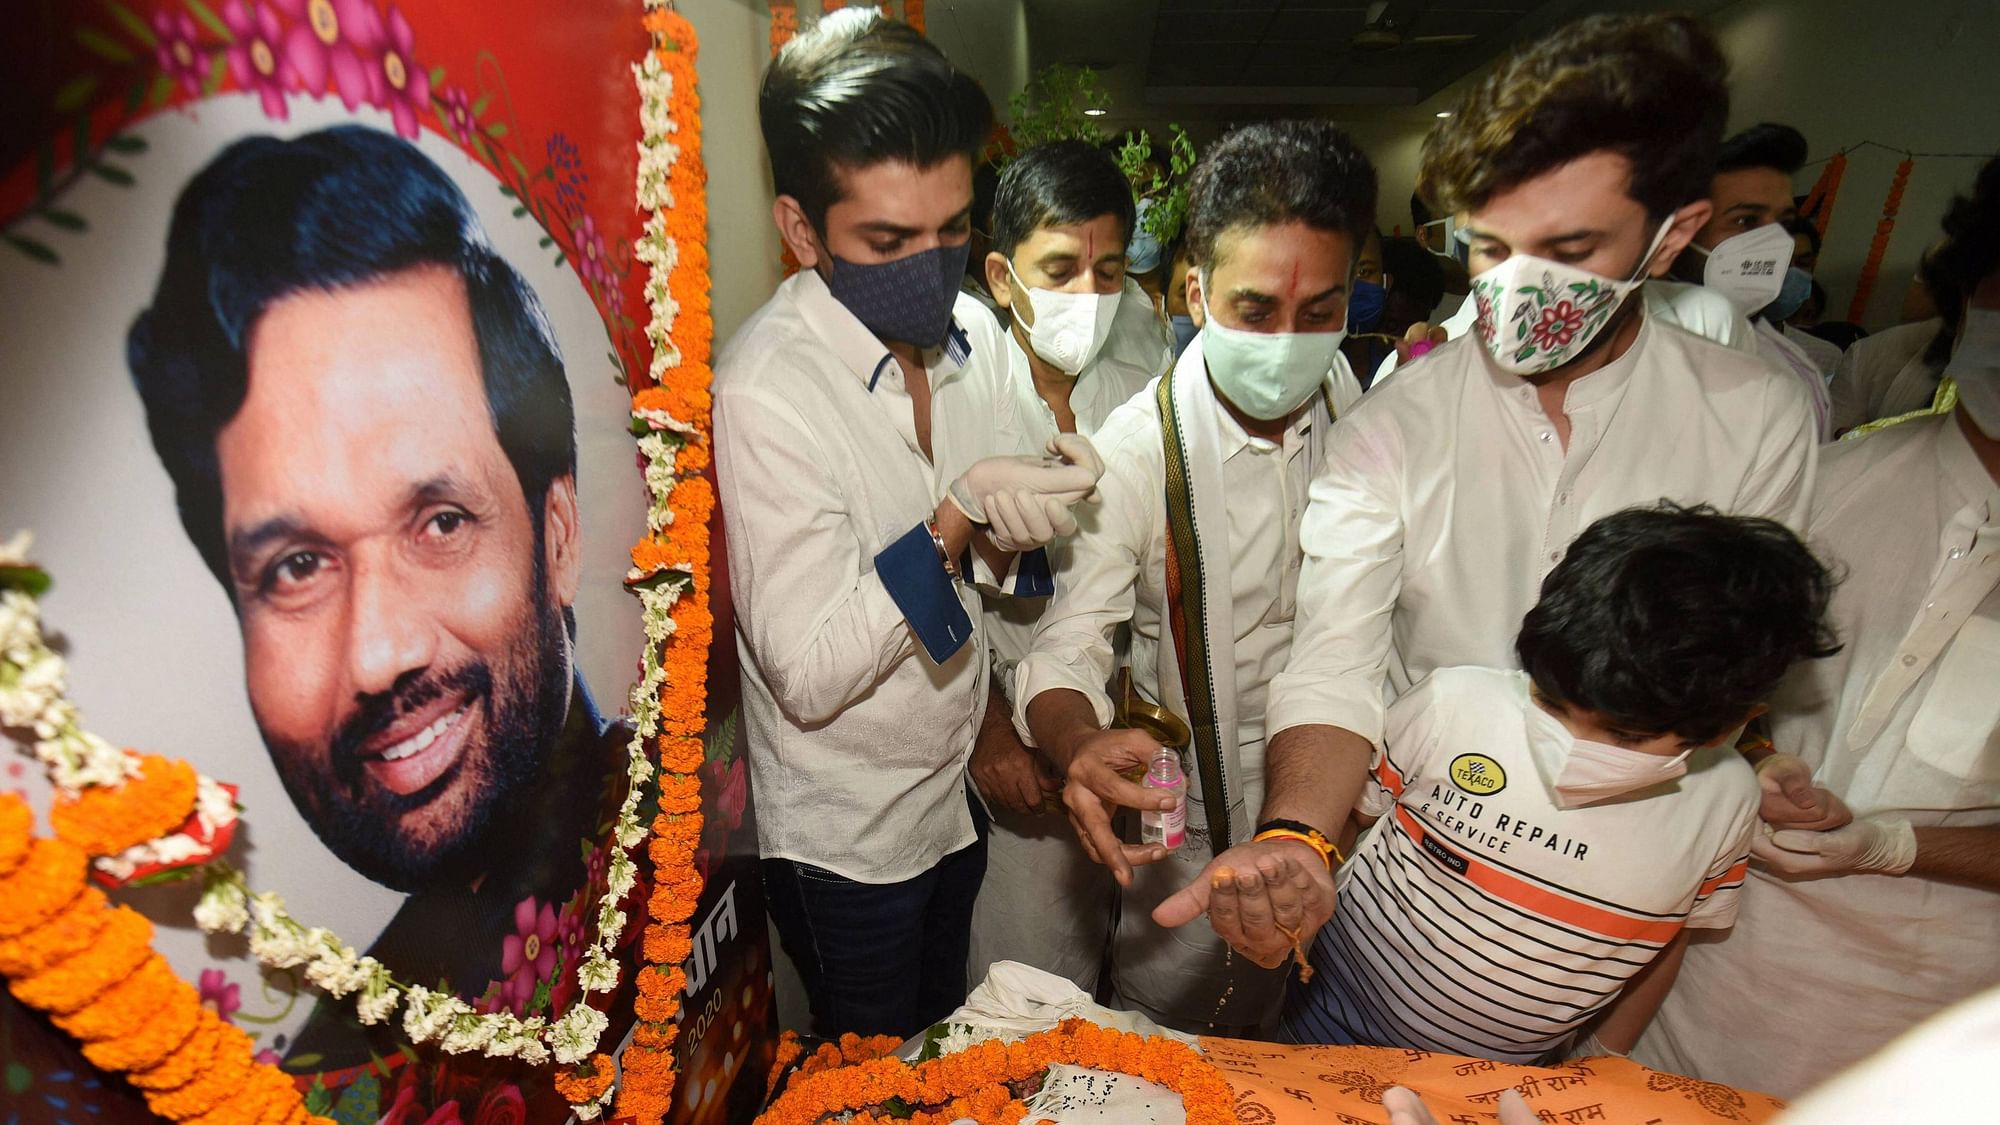 Union Minister Ram Vilas Paswan’s mortal remains were flown to Patna from Delhi on 9 October, Friday, for his last rites.